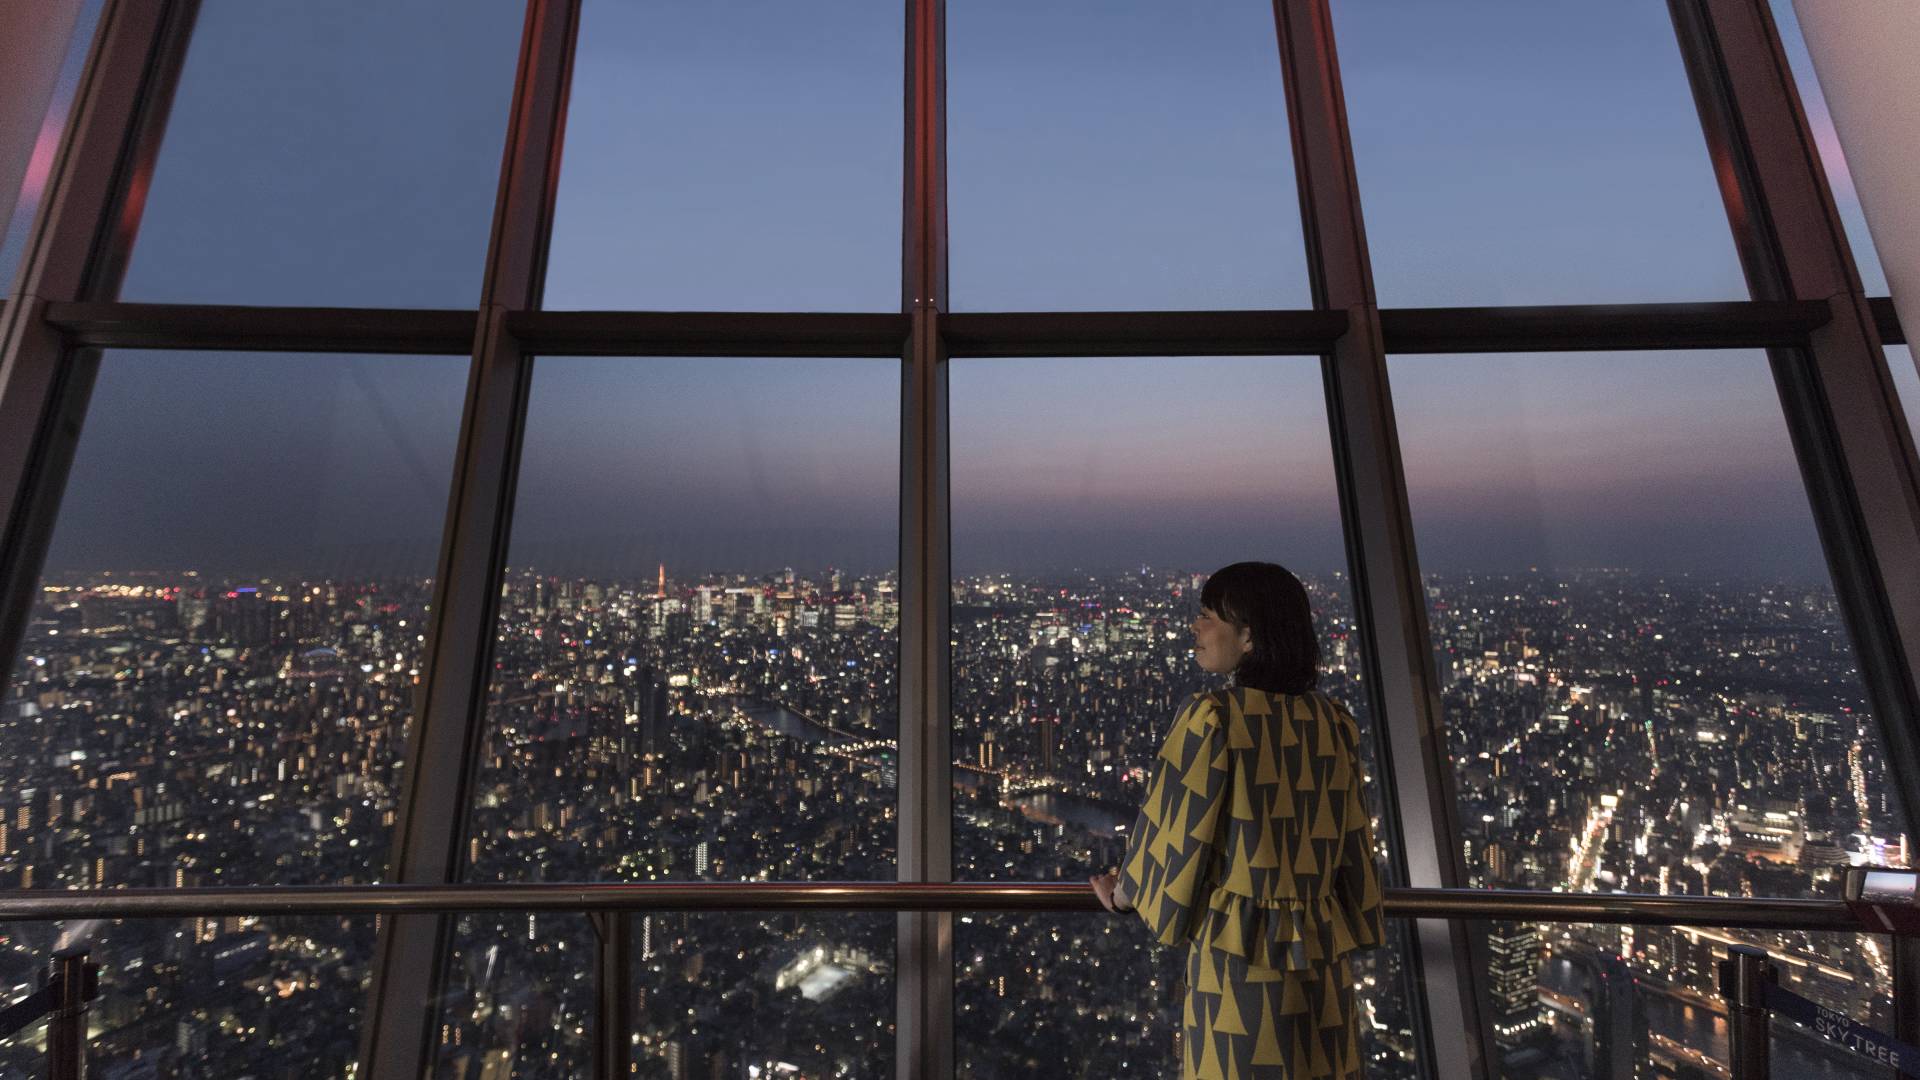 Unique perspectives on Tokyo, from above and below